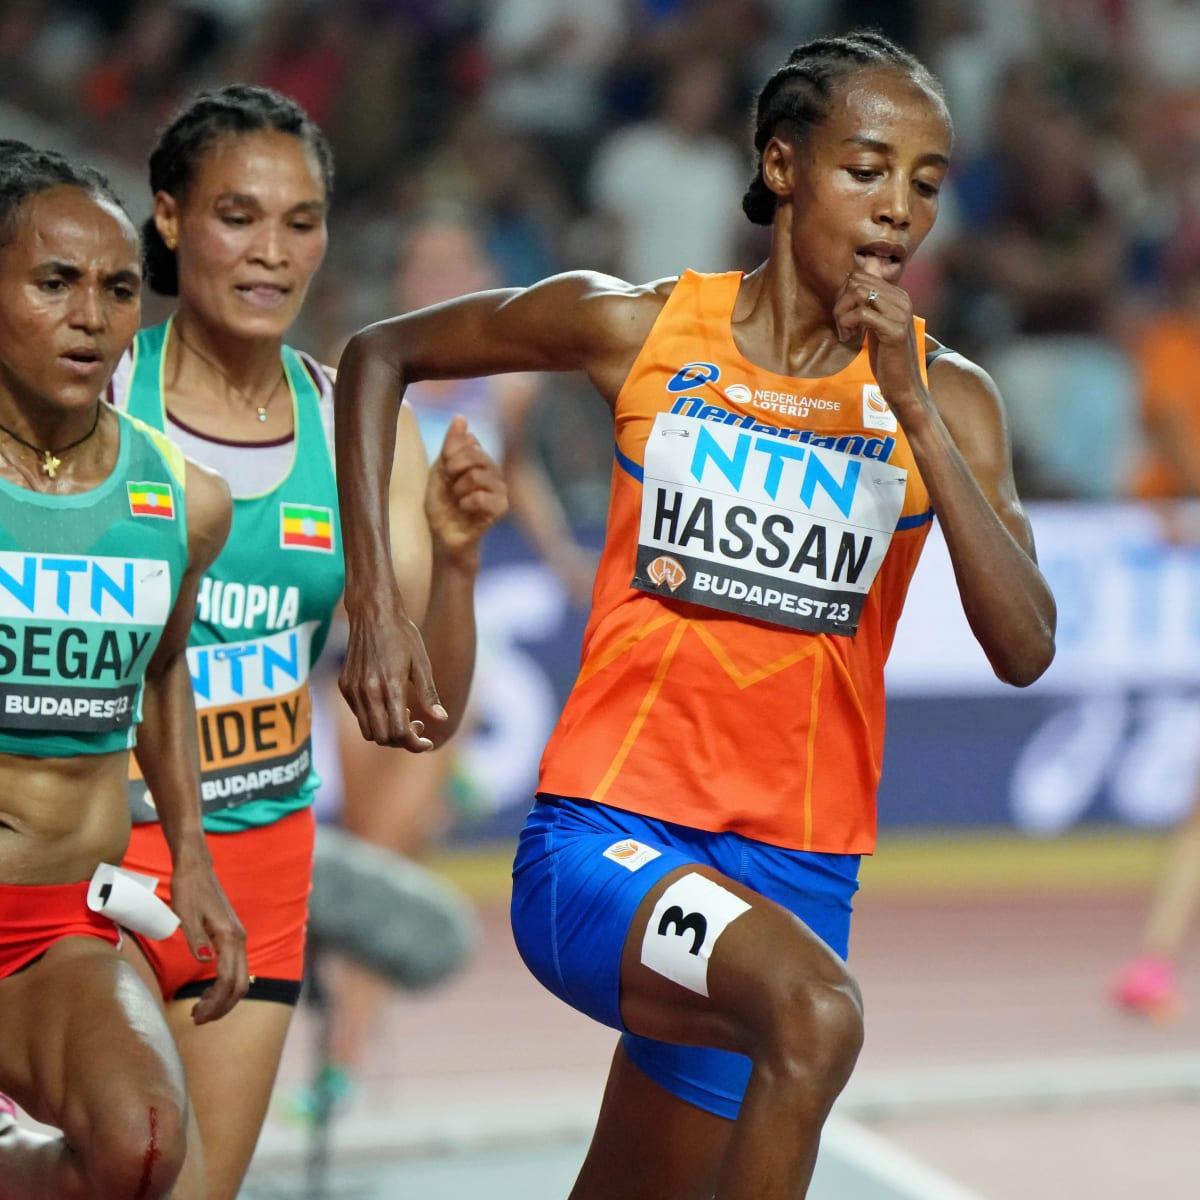 World Athletics Championships: Sifan Hassan Loses 10,000M Due to